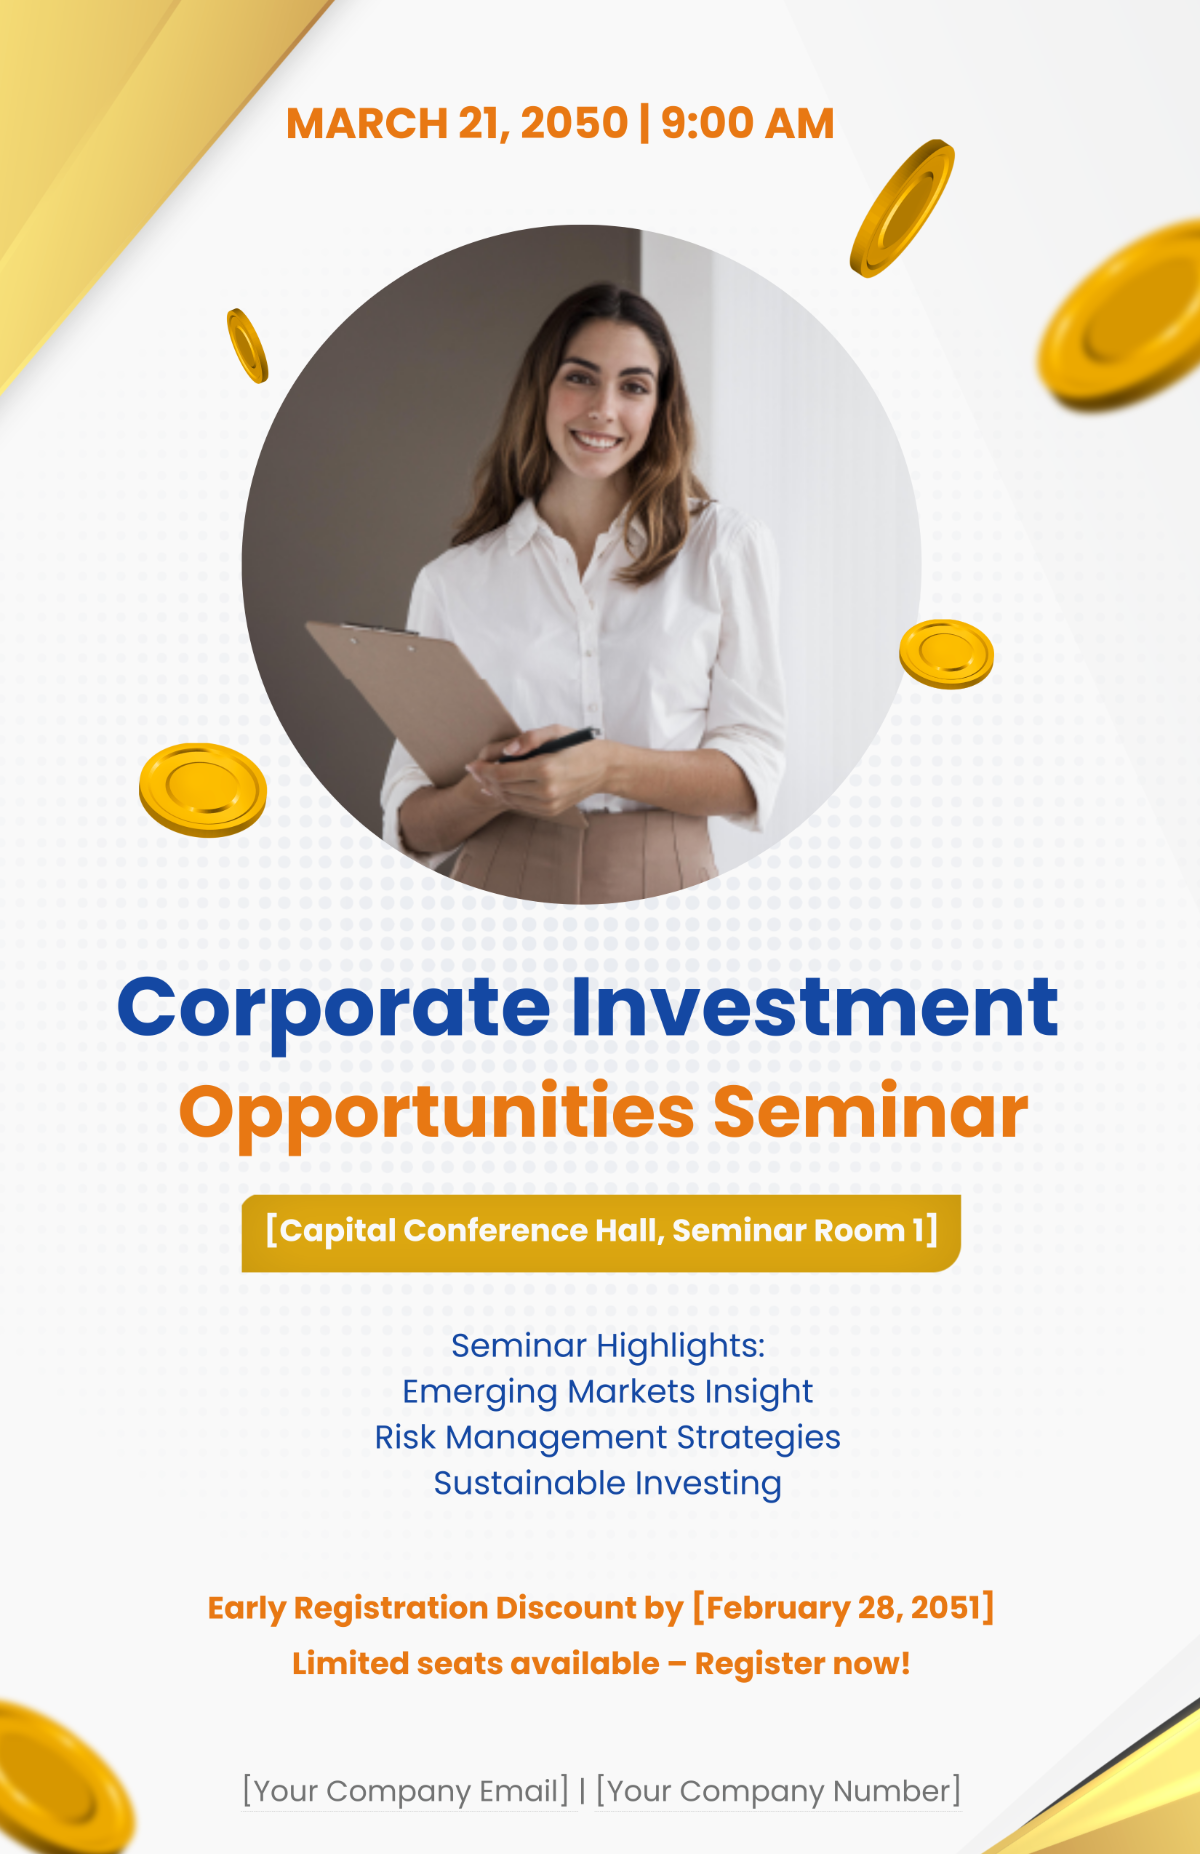 Corporate Investment Opportunities Seminar Poster